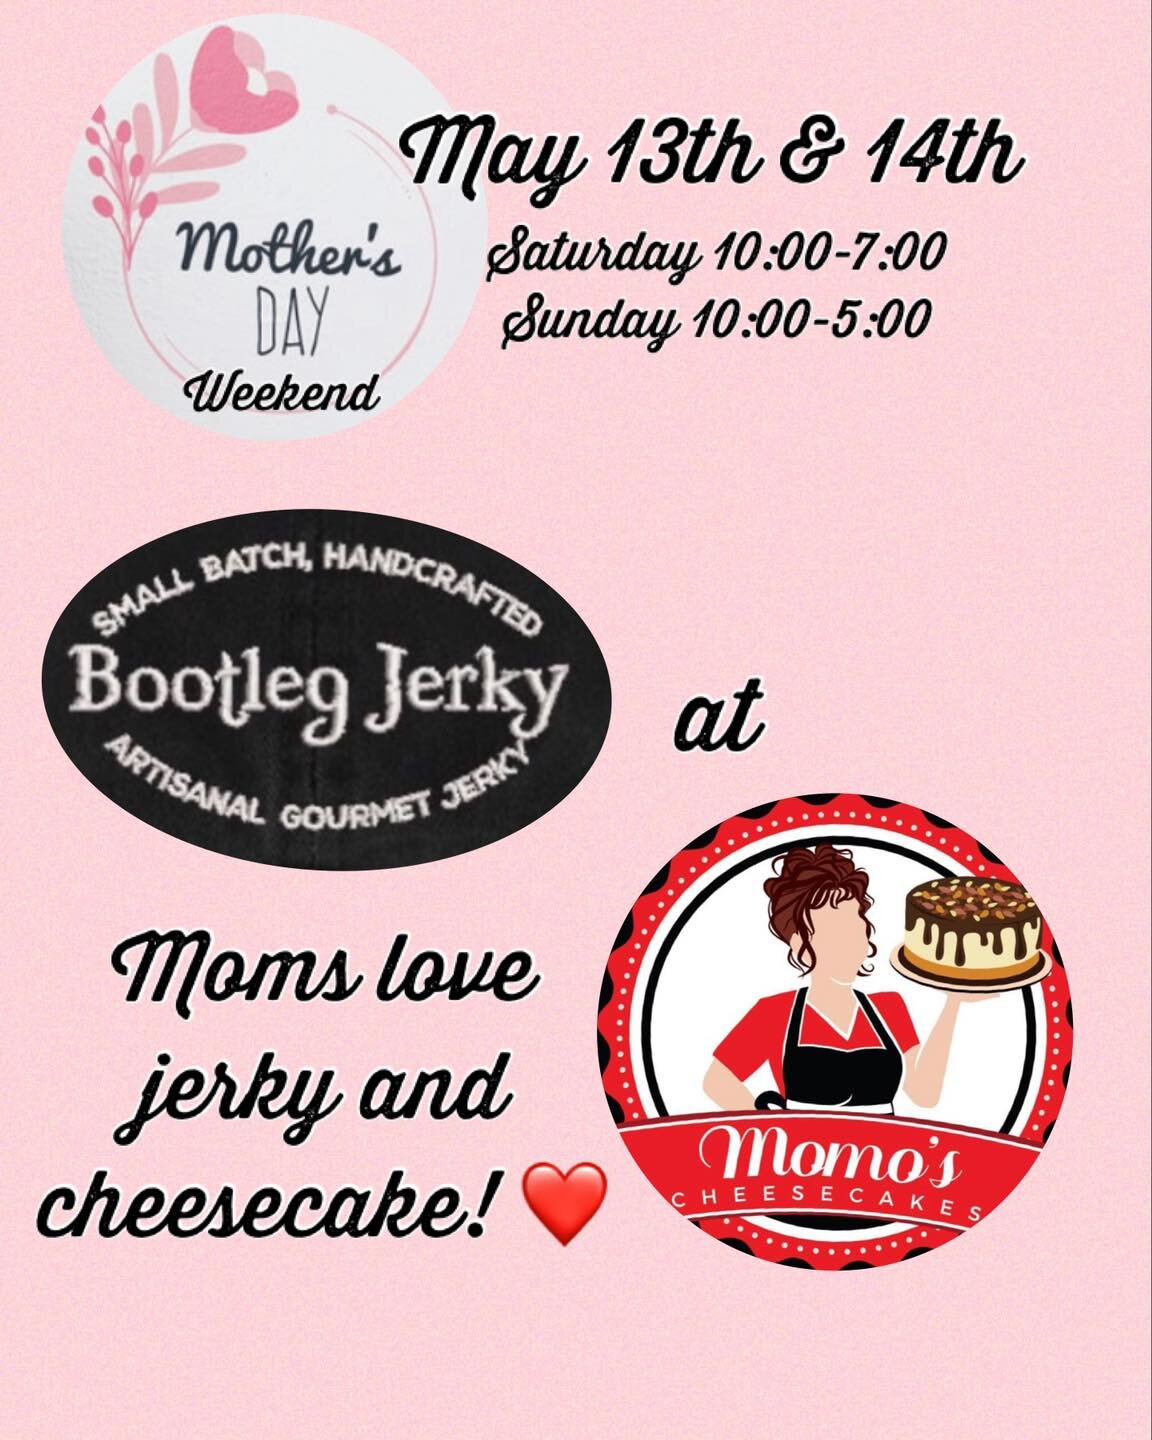 One stop shopping for Mother&rsquo;s Day! ❤️ #mothersday #mothersdaygifts #gifts #jerky #cheesecake #beefjerky